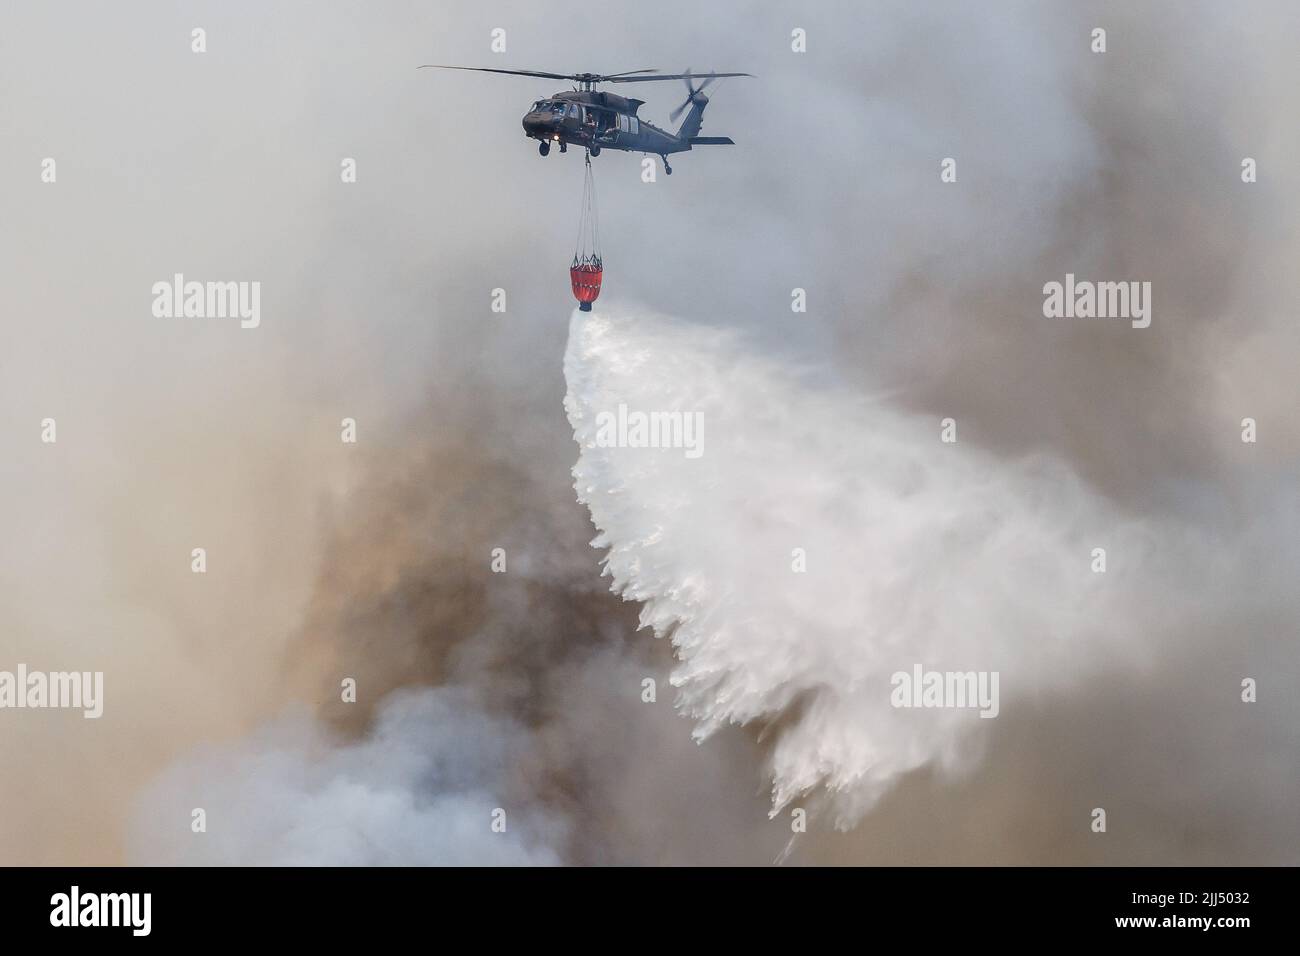 A Slovakian Sikorsky UH-60 Black Hawk helicopter carrying a Bambi bucket for extinguishing fires drops water on a large wildfire that burns near the village of Novelo in the Karst region of Slovenia. About a thousand firemen with air support from three Slovenian helicopters, two Serbian helicopters, an Austrian helicopter, a Slovakian Black Hawk helicopter and two Hungarian helicopters, a Croatian Canadair firefighting airplane and a Slovenian army Pilatus airplane continued battling a large wildfire that broke out five days ago and has intensified in the Karst region of Slovenia. Villages in Stock Photo